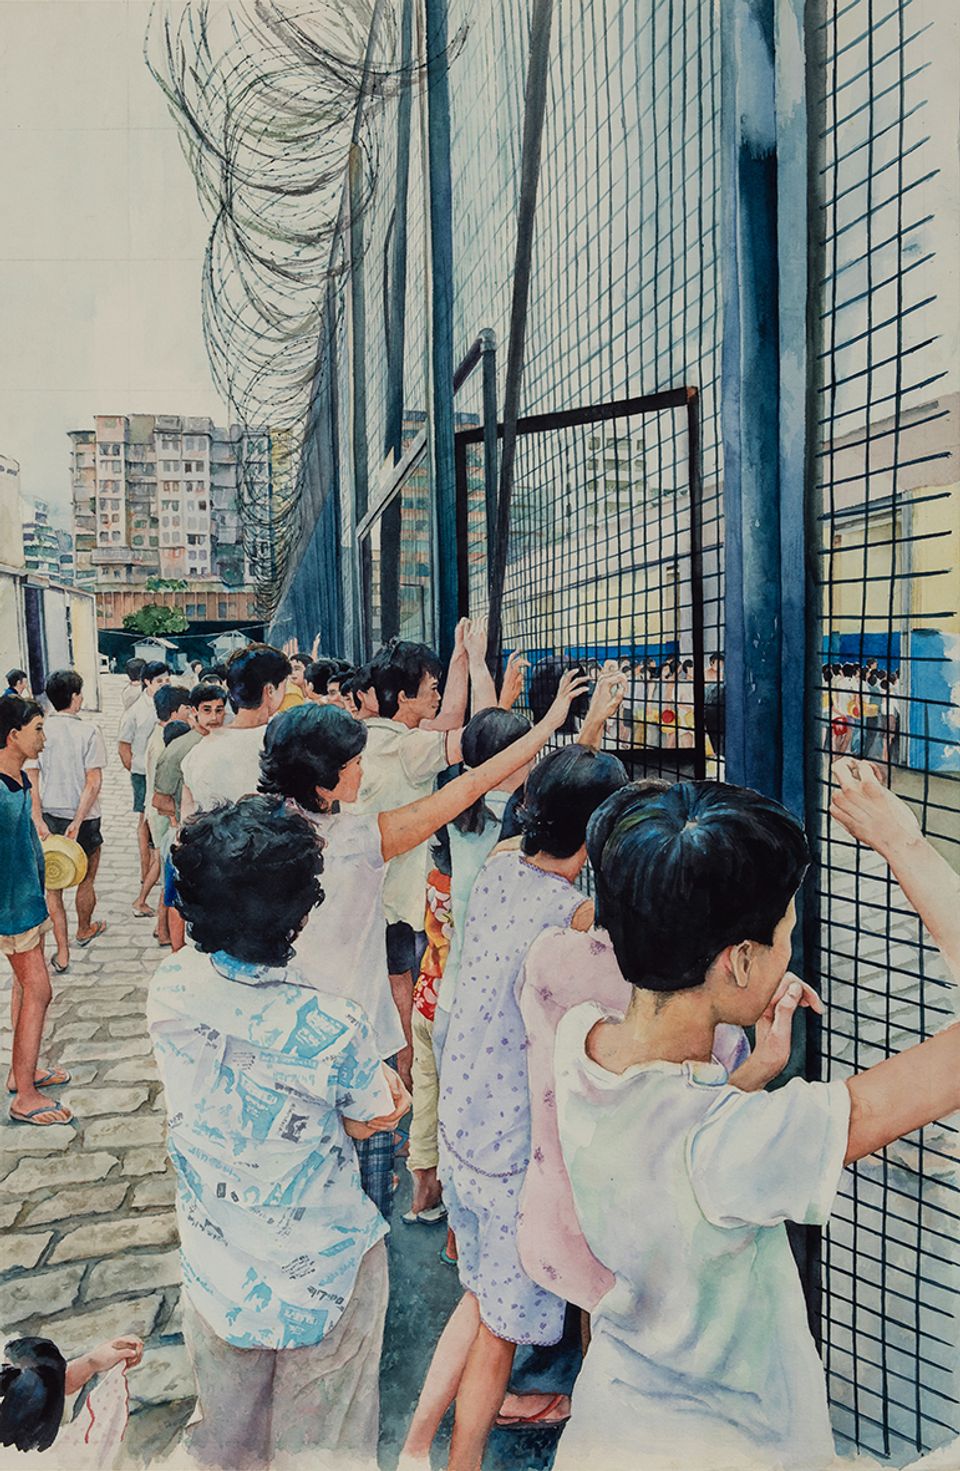 A painting of children looking through a fence.